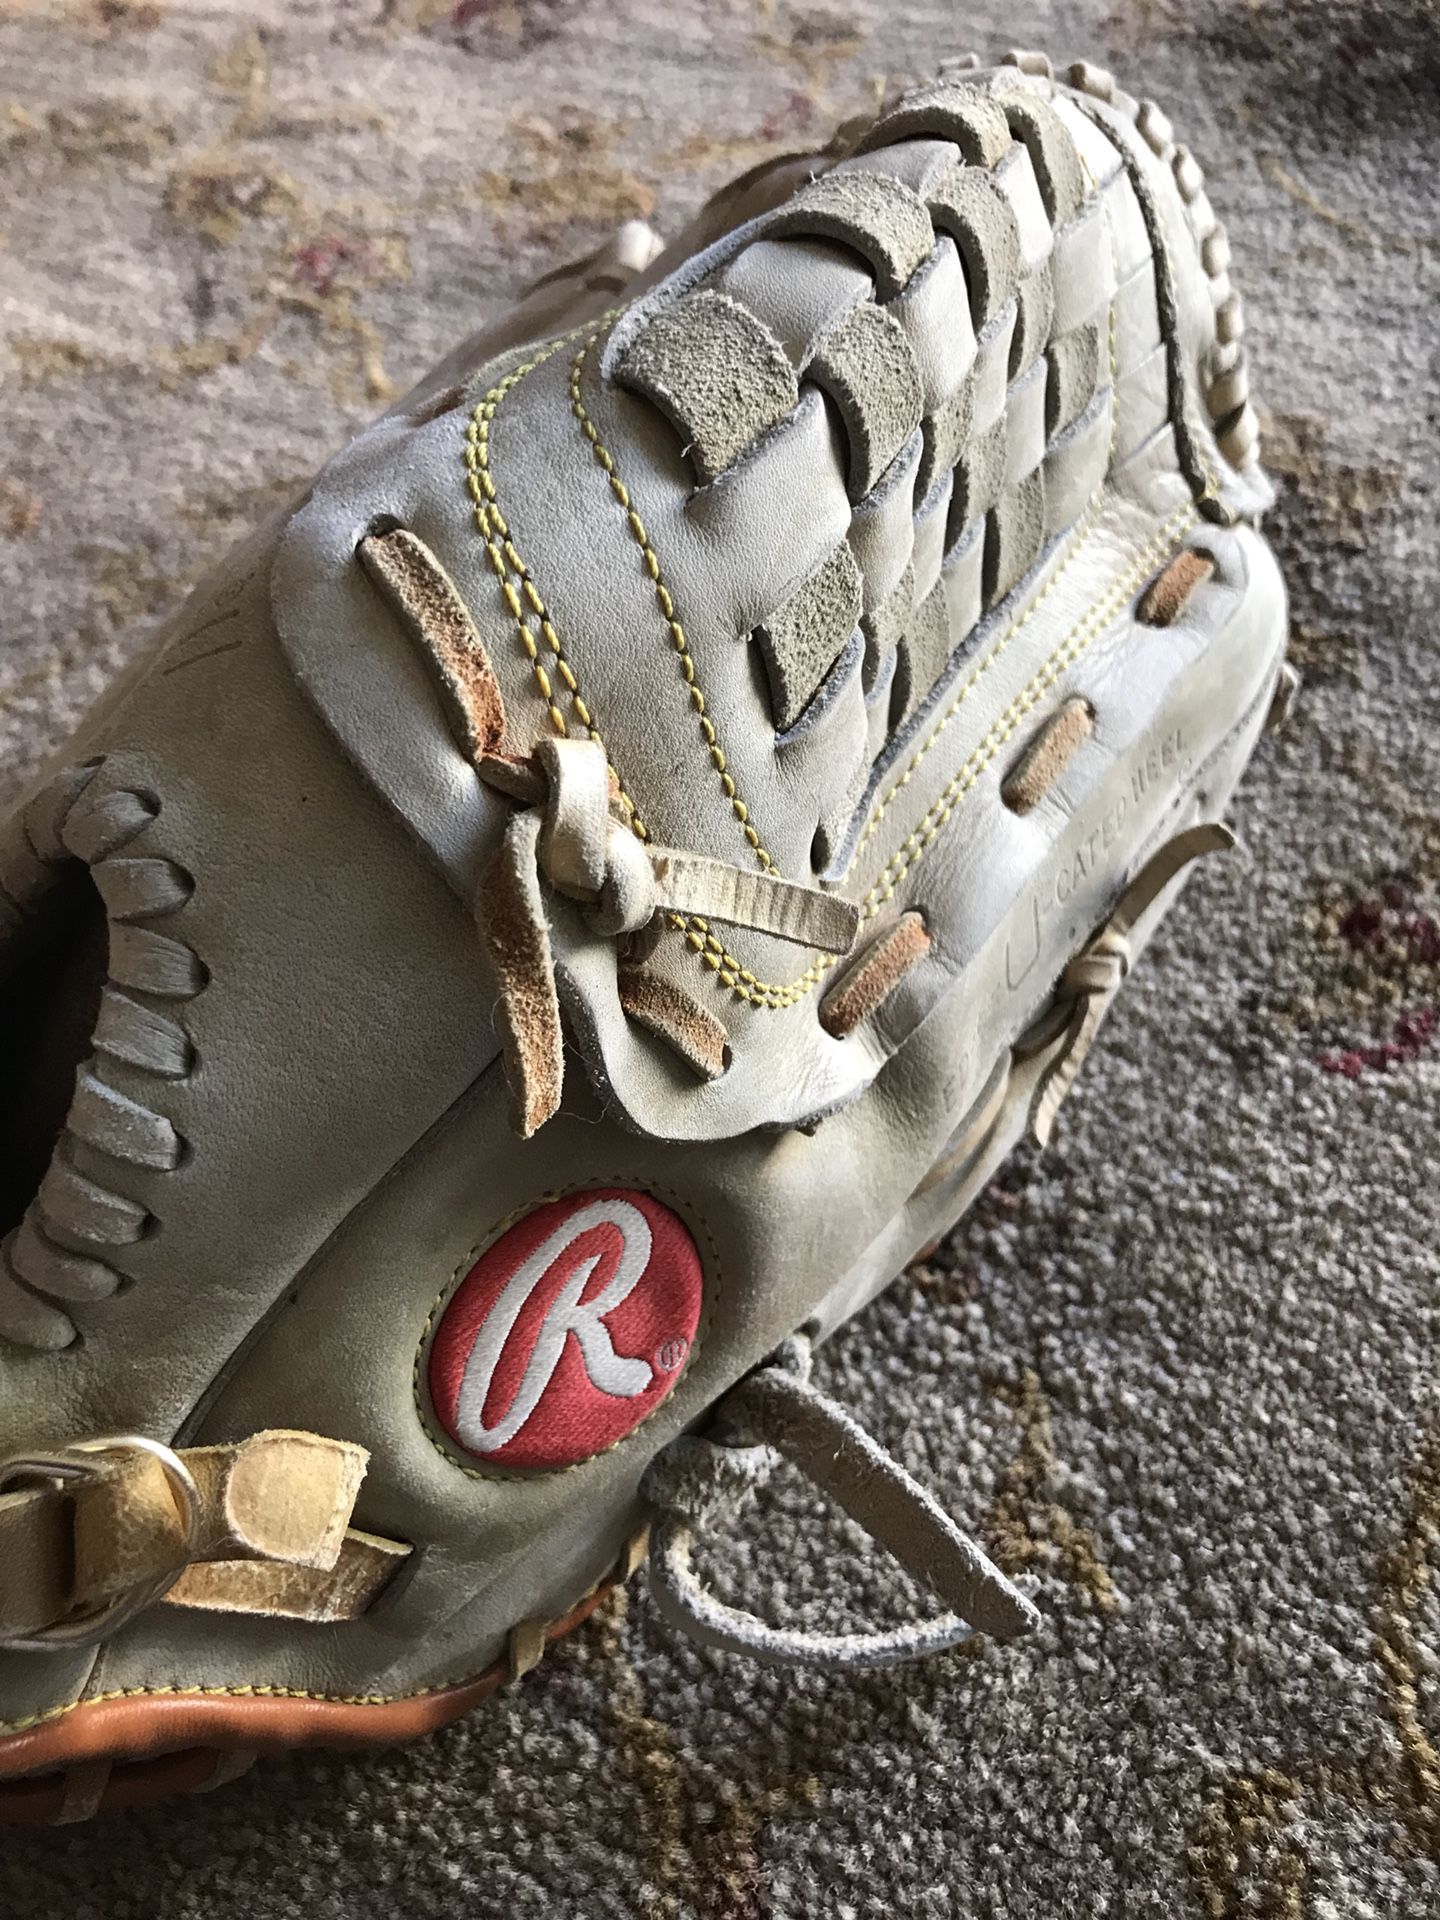 Baseball glove Size 13 for $10 Firm!!!